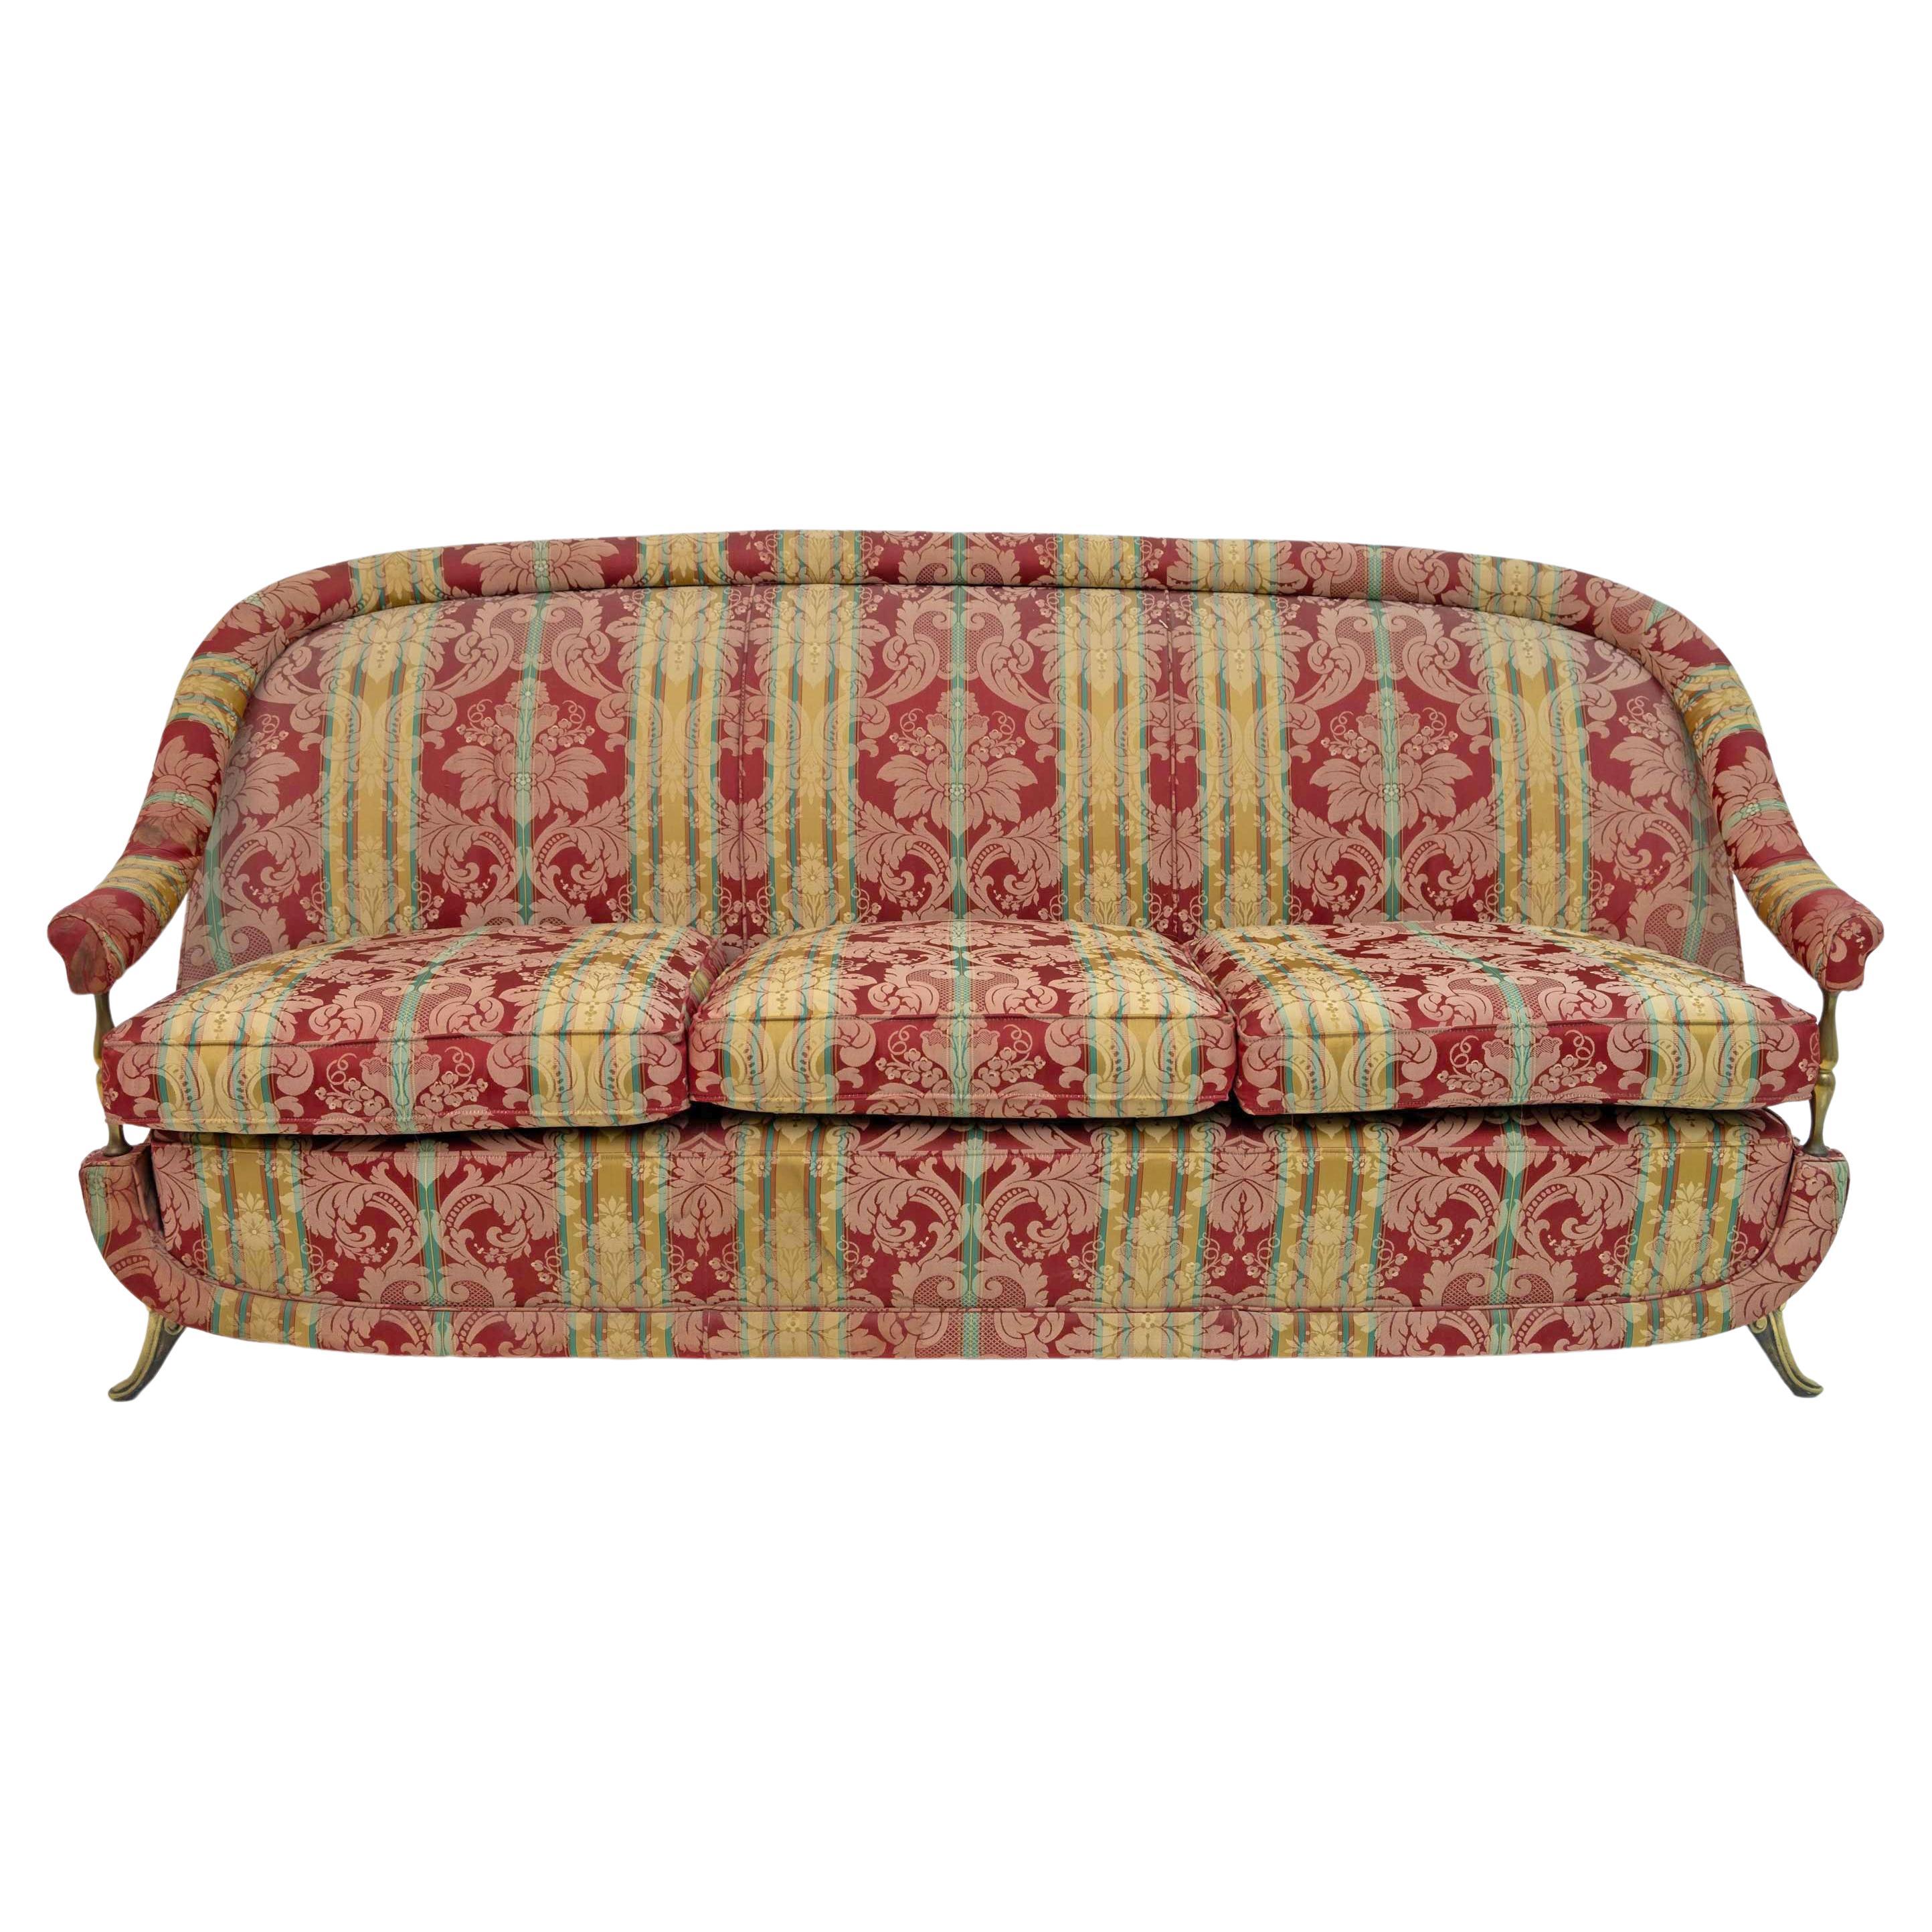 Art Dèco Style French Brass And Fabric Sofa, 1950s For Sale